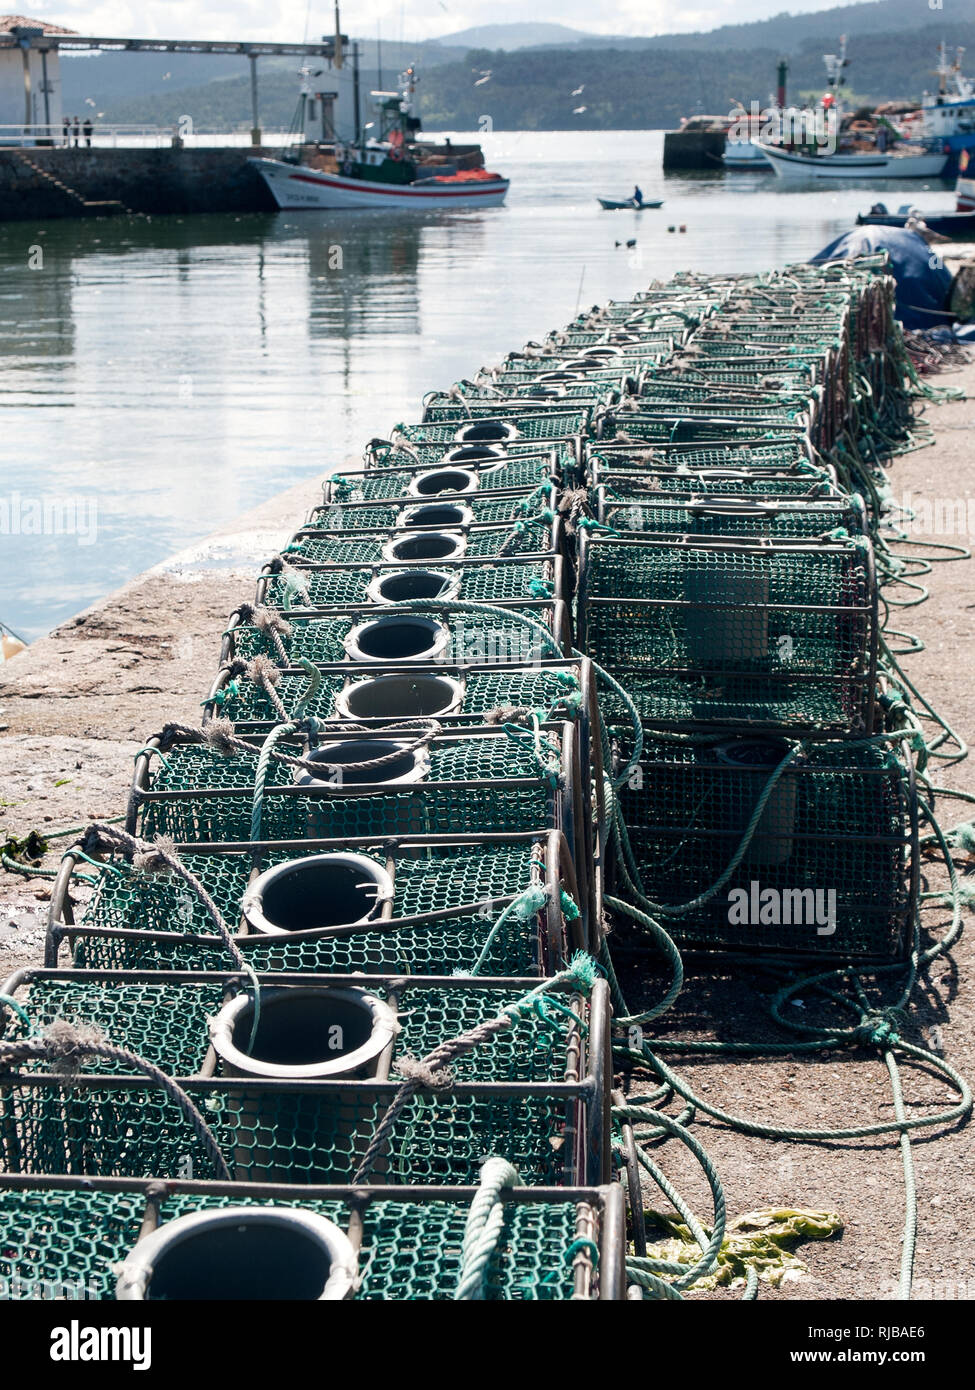 Lobster and crab fishing pot cages creels stacked. Fishing port Stock Photo